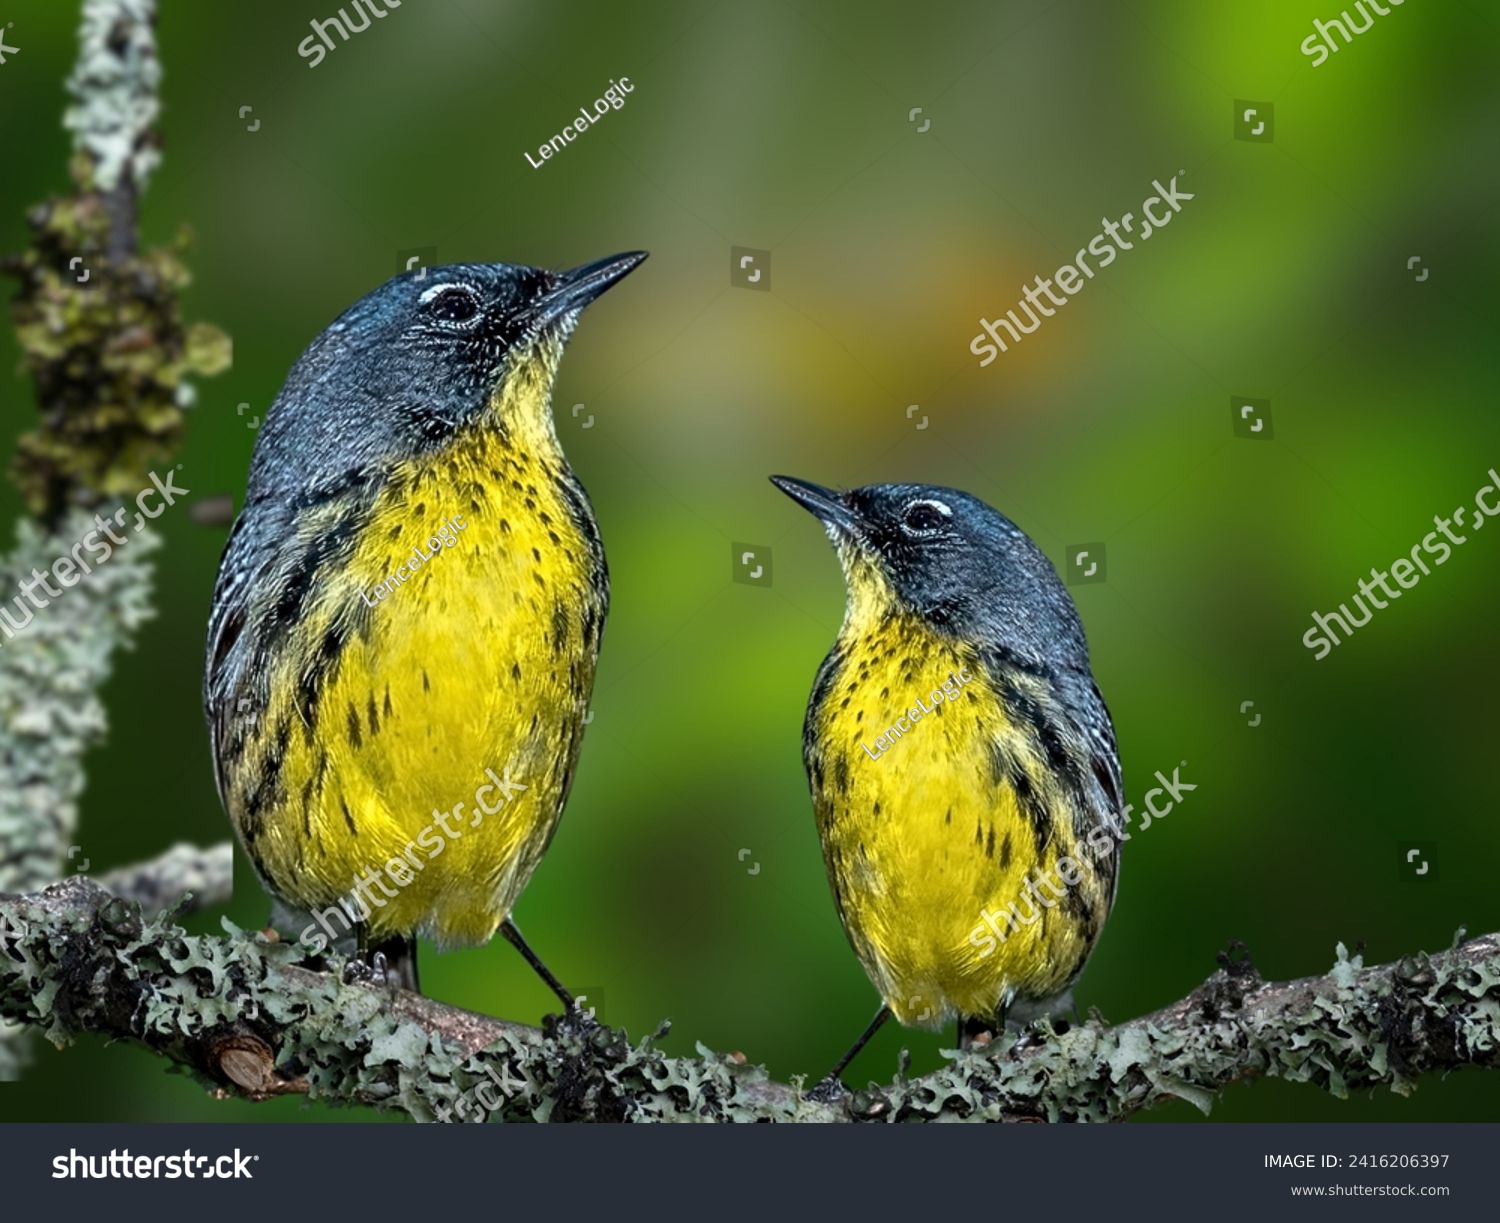 A kirtland's warbler perches on a fern branch, an endangered species that is losing habit due to overdevelopment and deforestation in north central Michigan. #2416206397